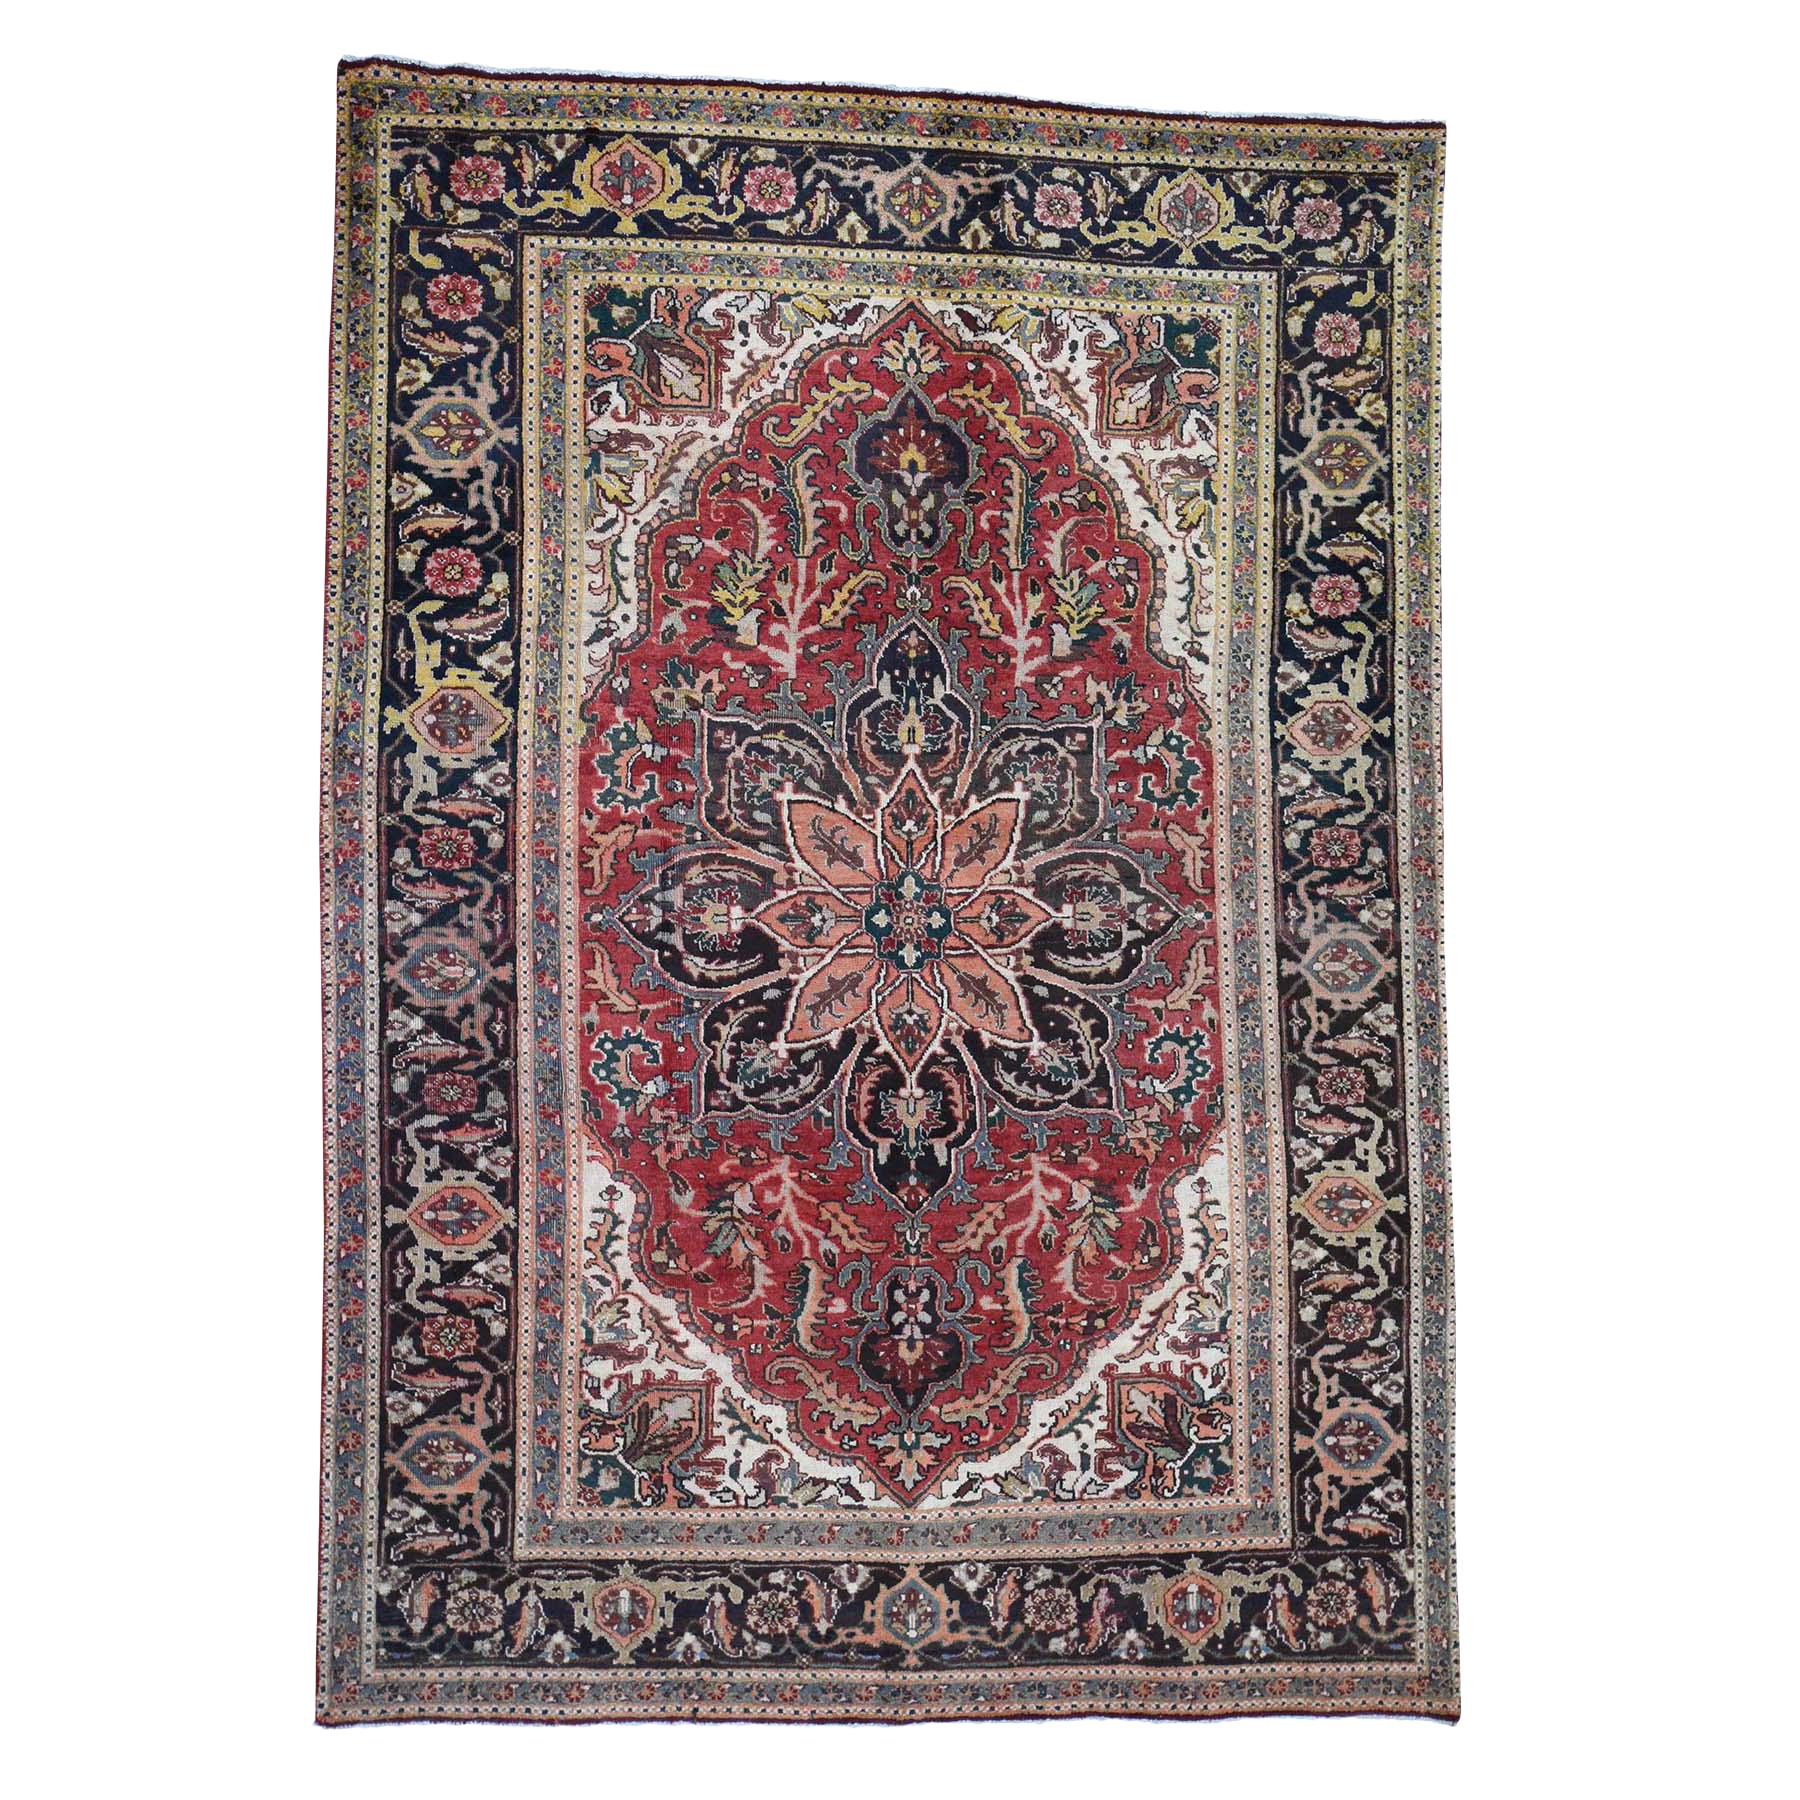 Semi Antique Persian Heriz Some Wear, Clean Hand-Knotted Oriental Rug, 6'4" x 9'